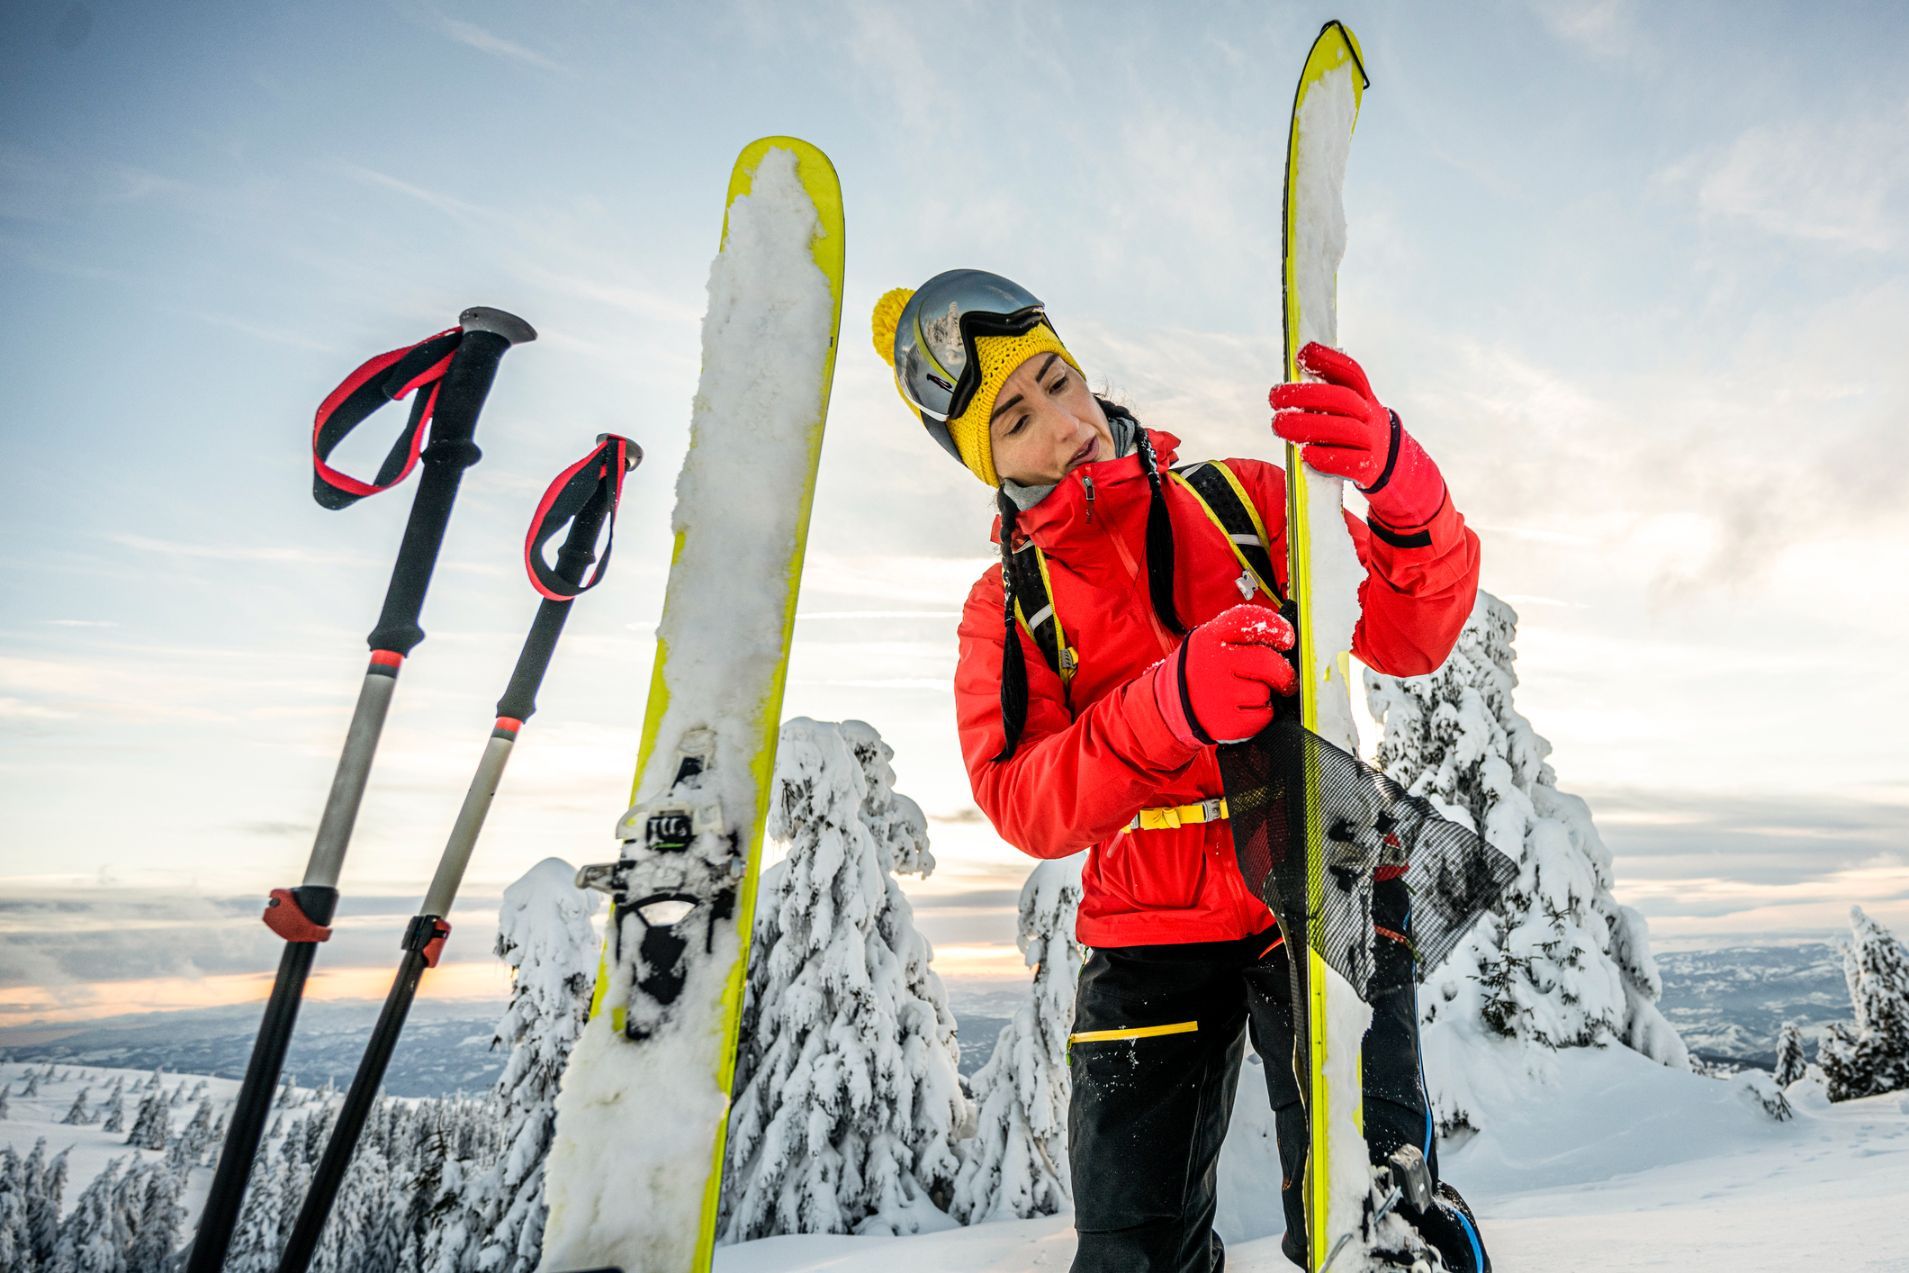 A female skier examines her skis